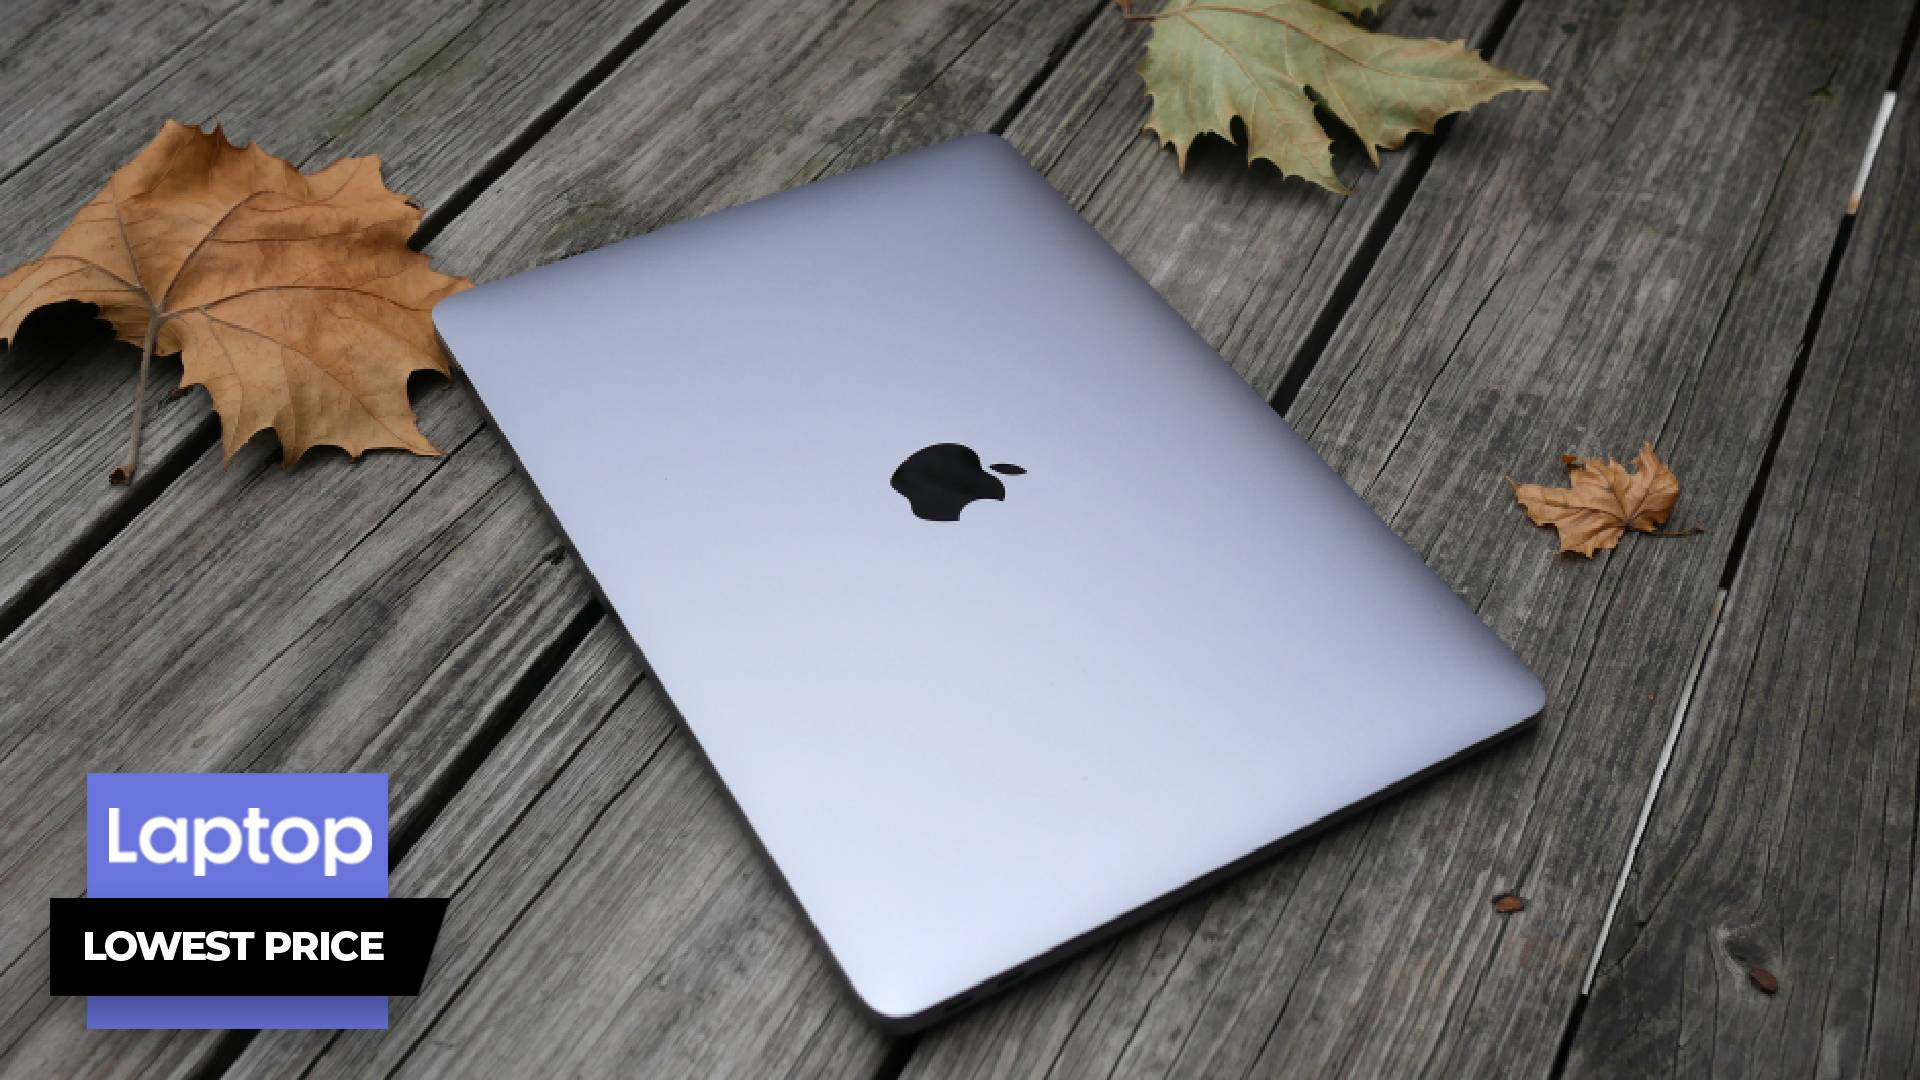 MacBook Air M1 closed on a deck with fallen leaves around it - Laptop Mag lowest price banner in corner